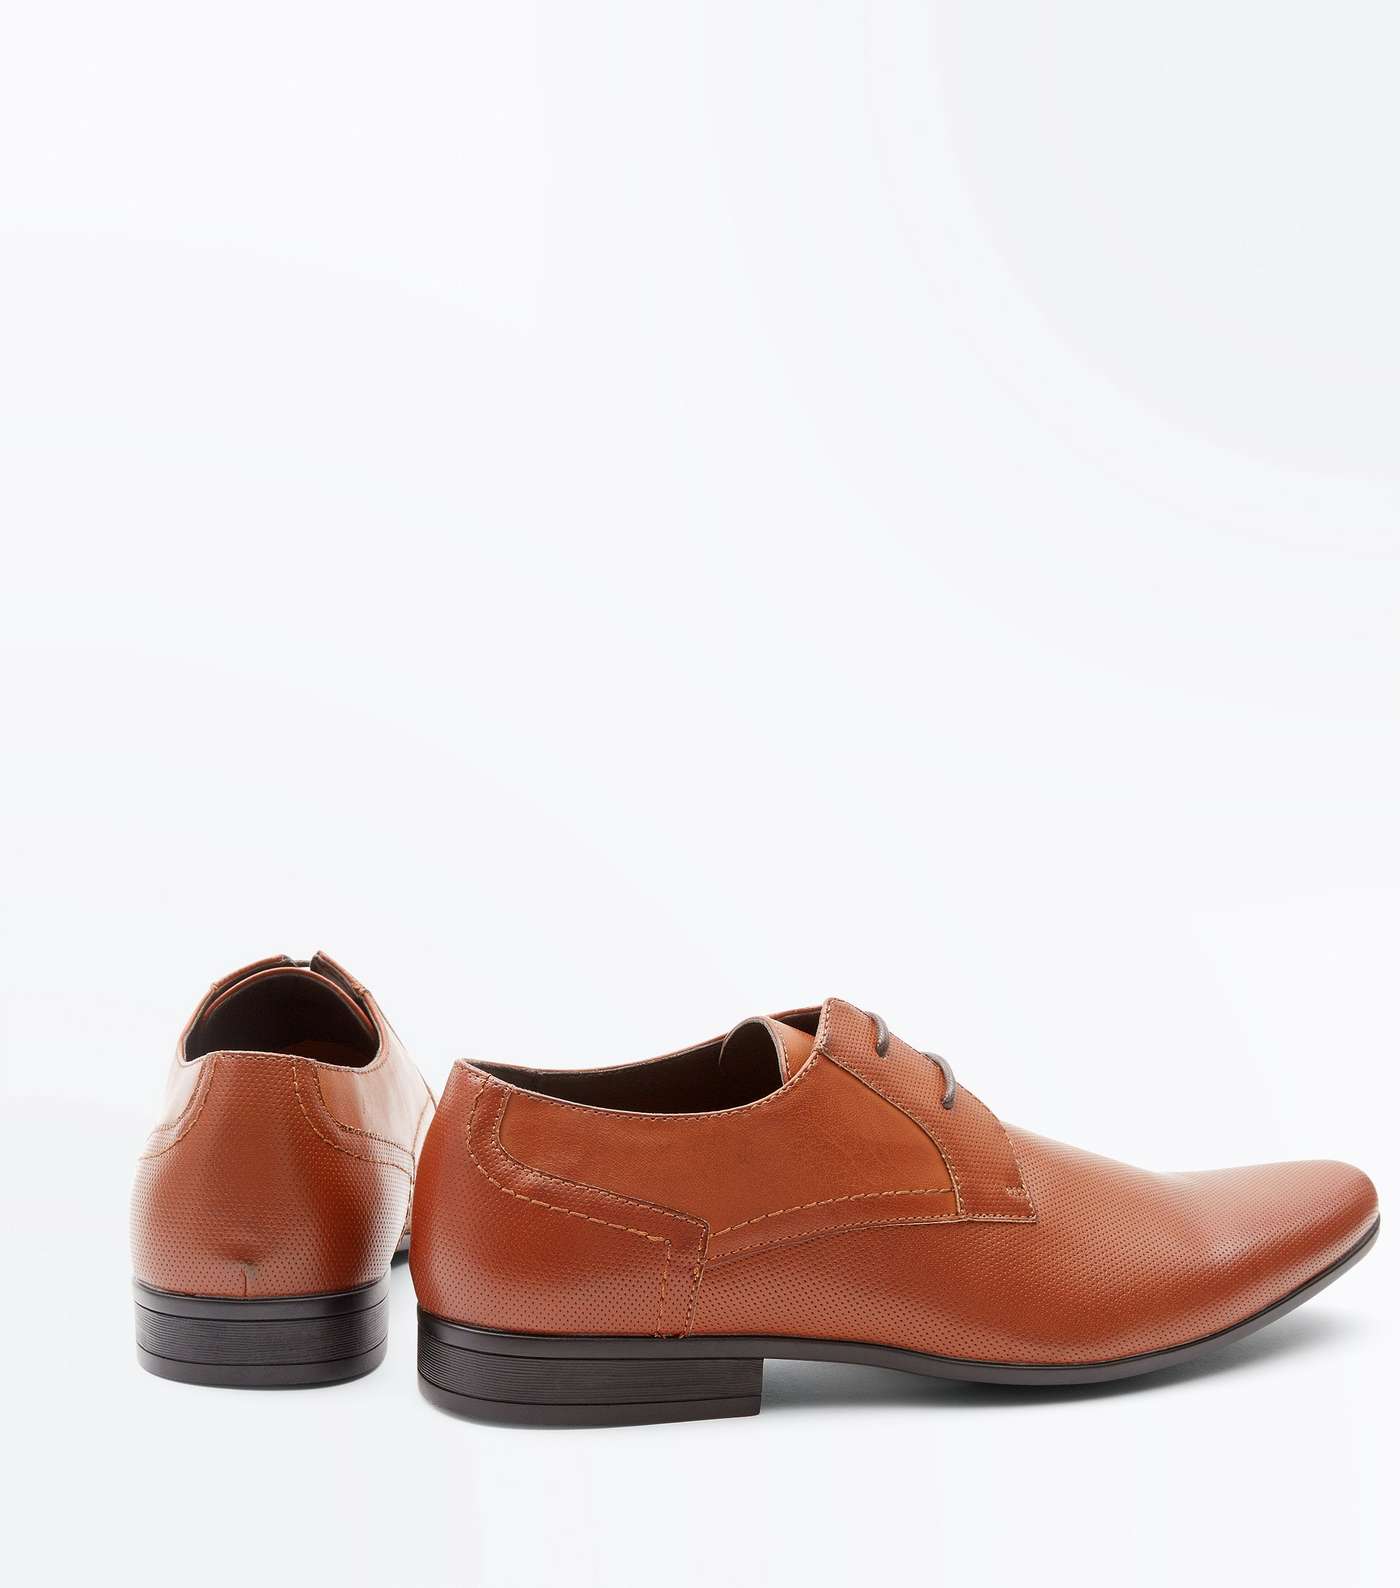 Tan Perforated Formal Shoes Image 2